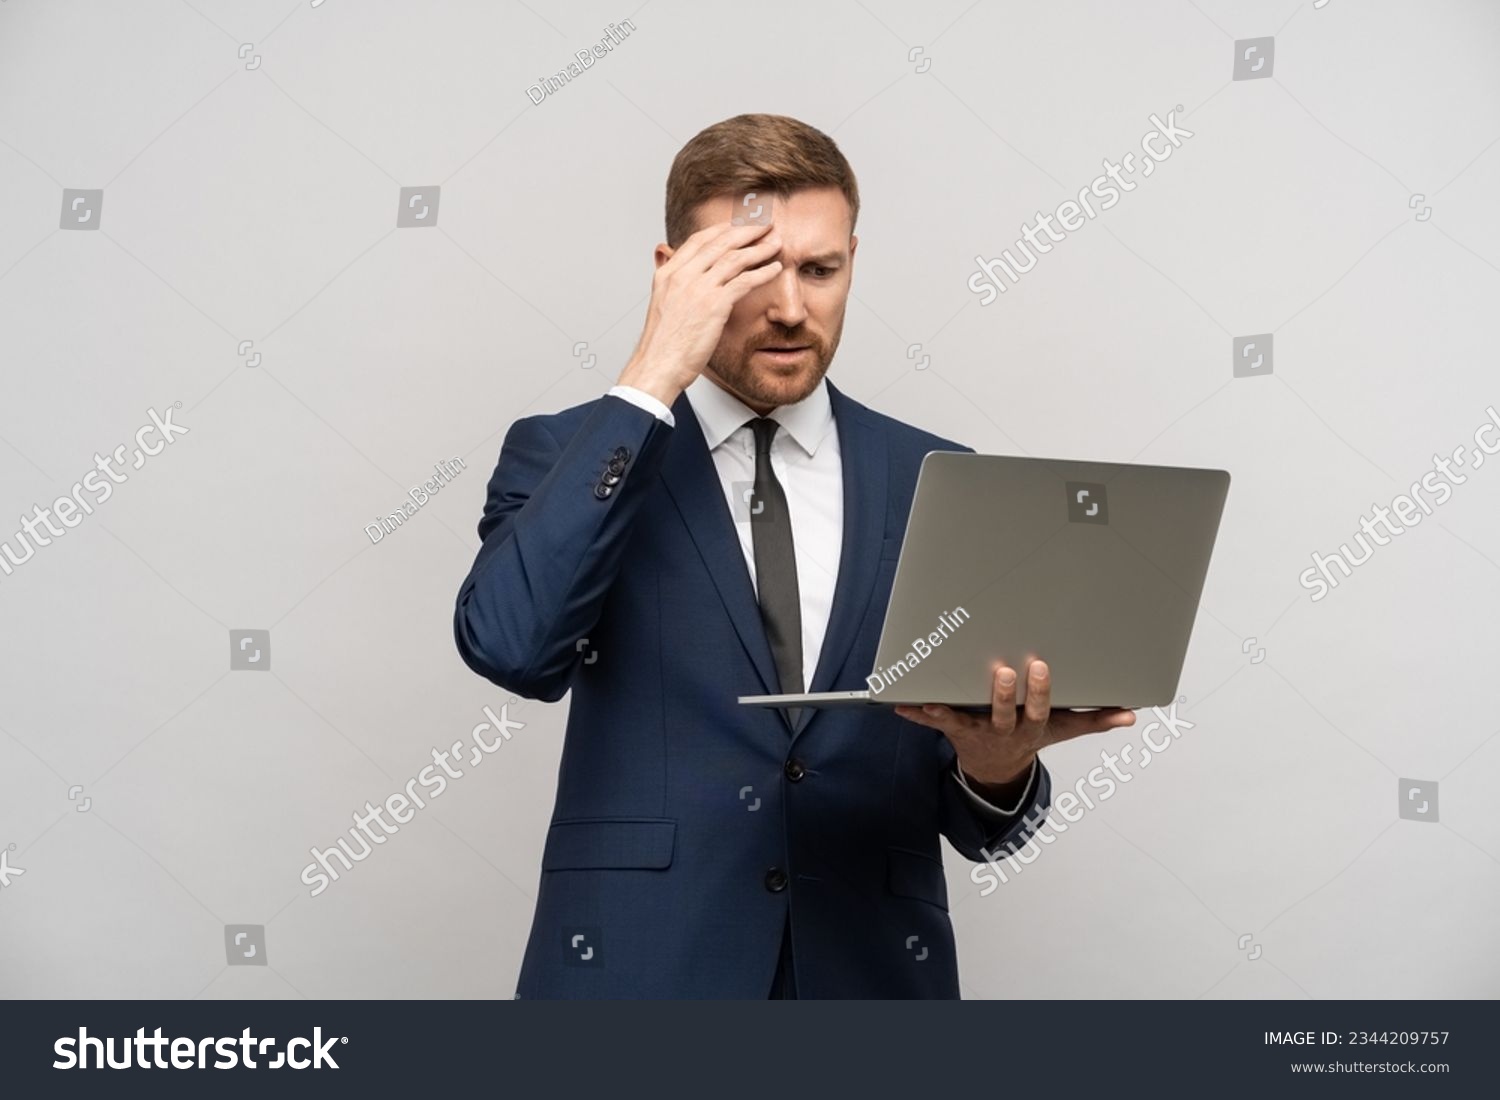 Frustrated businessman with laptop in hands. Worried trader man failed on stock exchange failed in trading, falling sales, business collapse, difficulties financial problems, burnt investments #2344209757